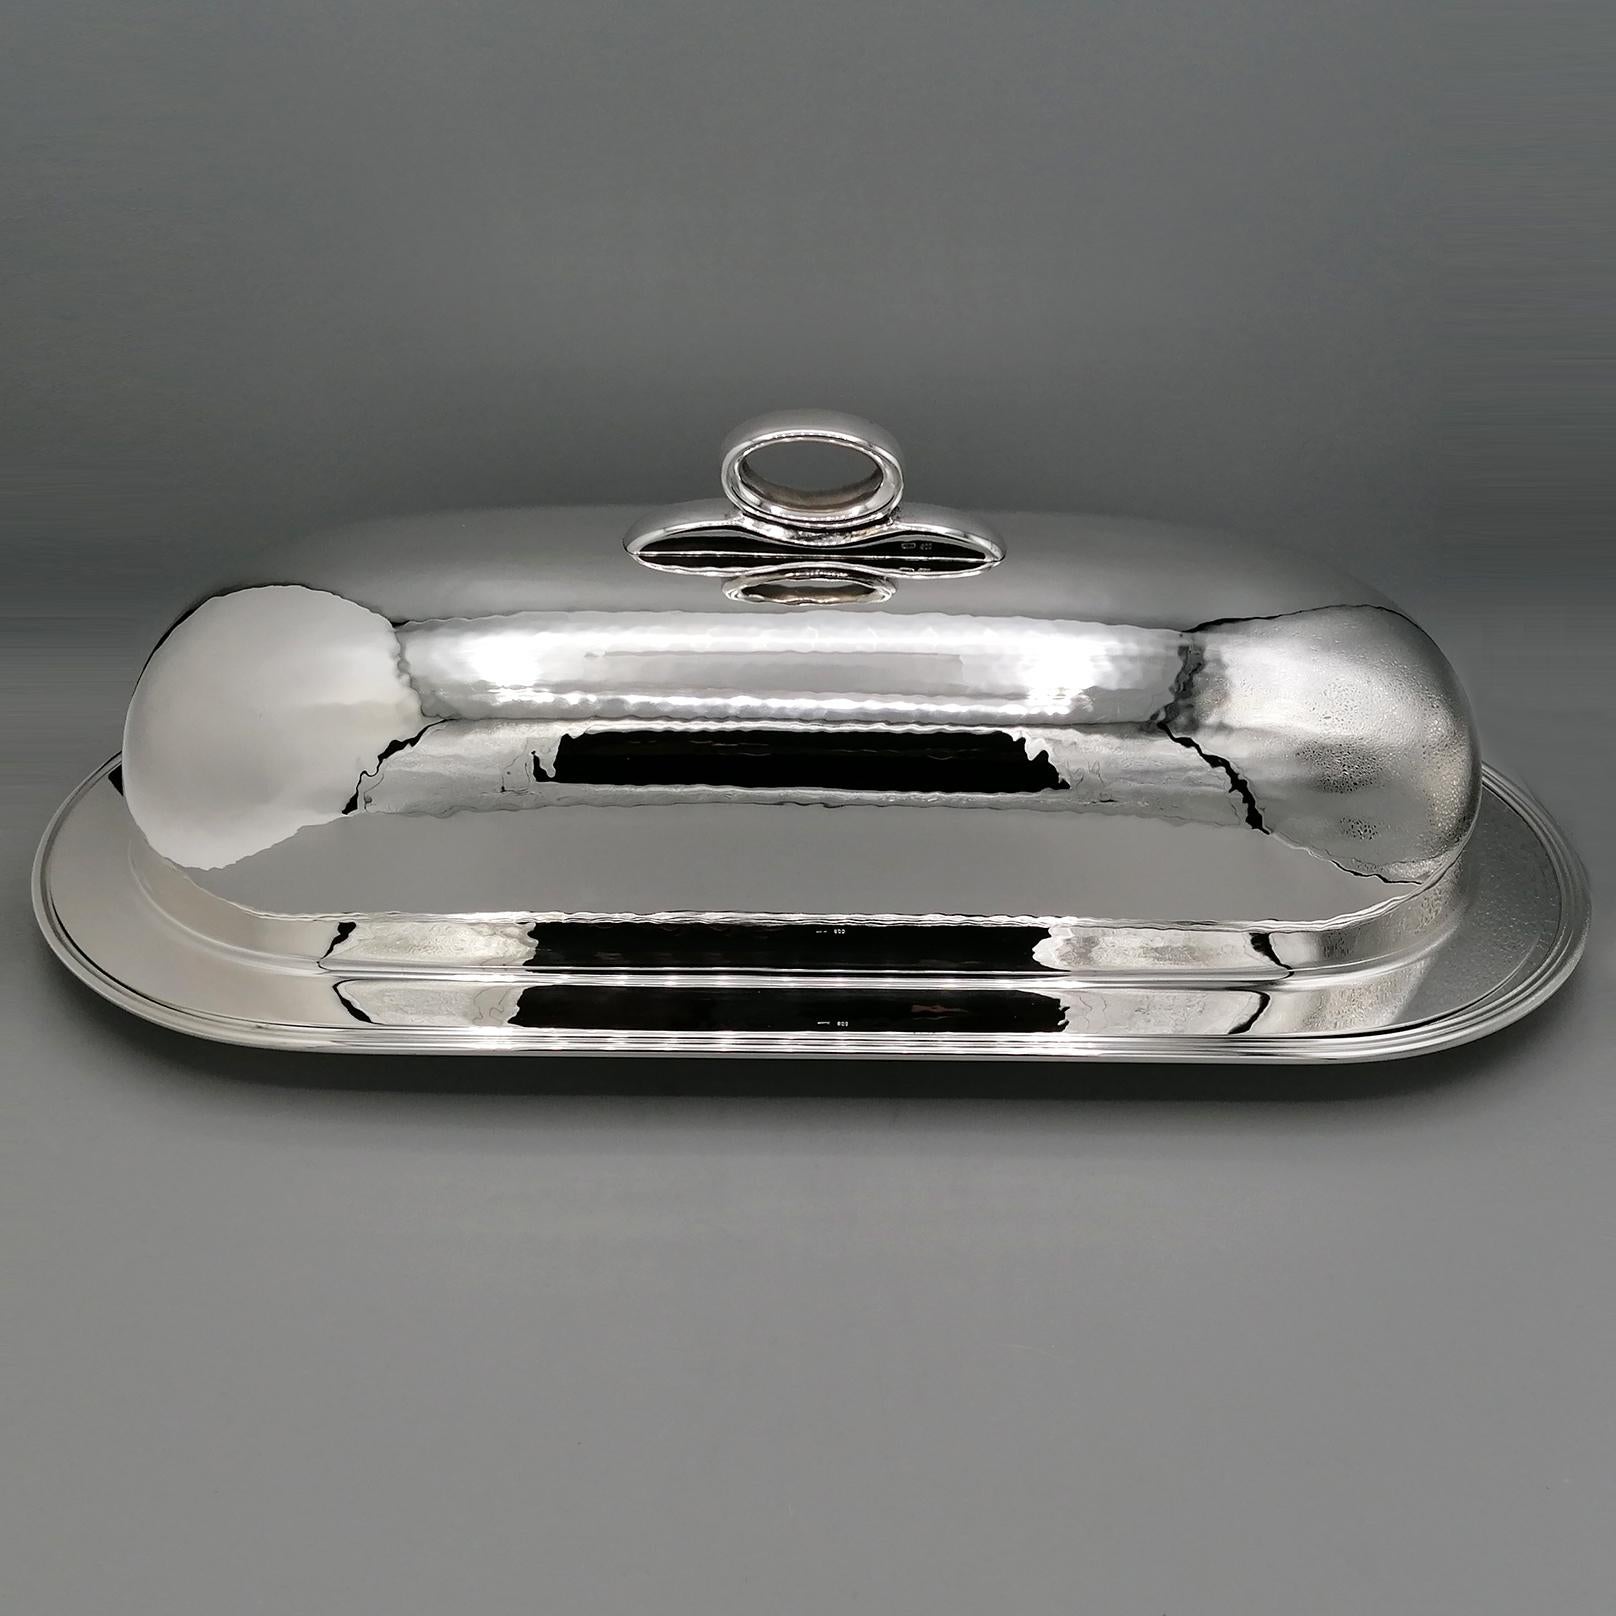 Meat serving plate in 800 silver with lid.
Oblong or 